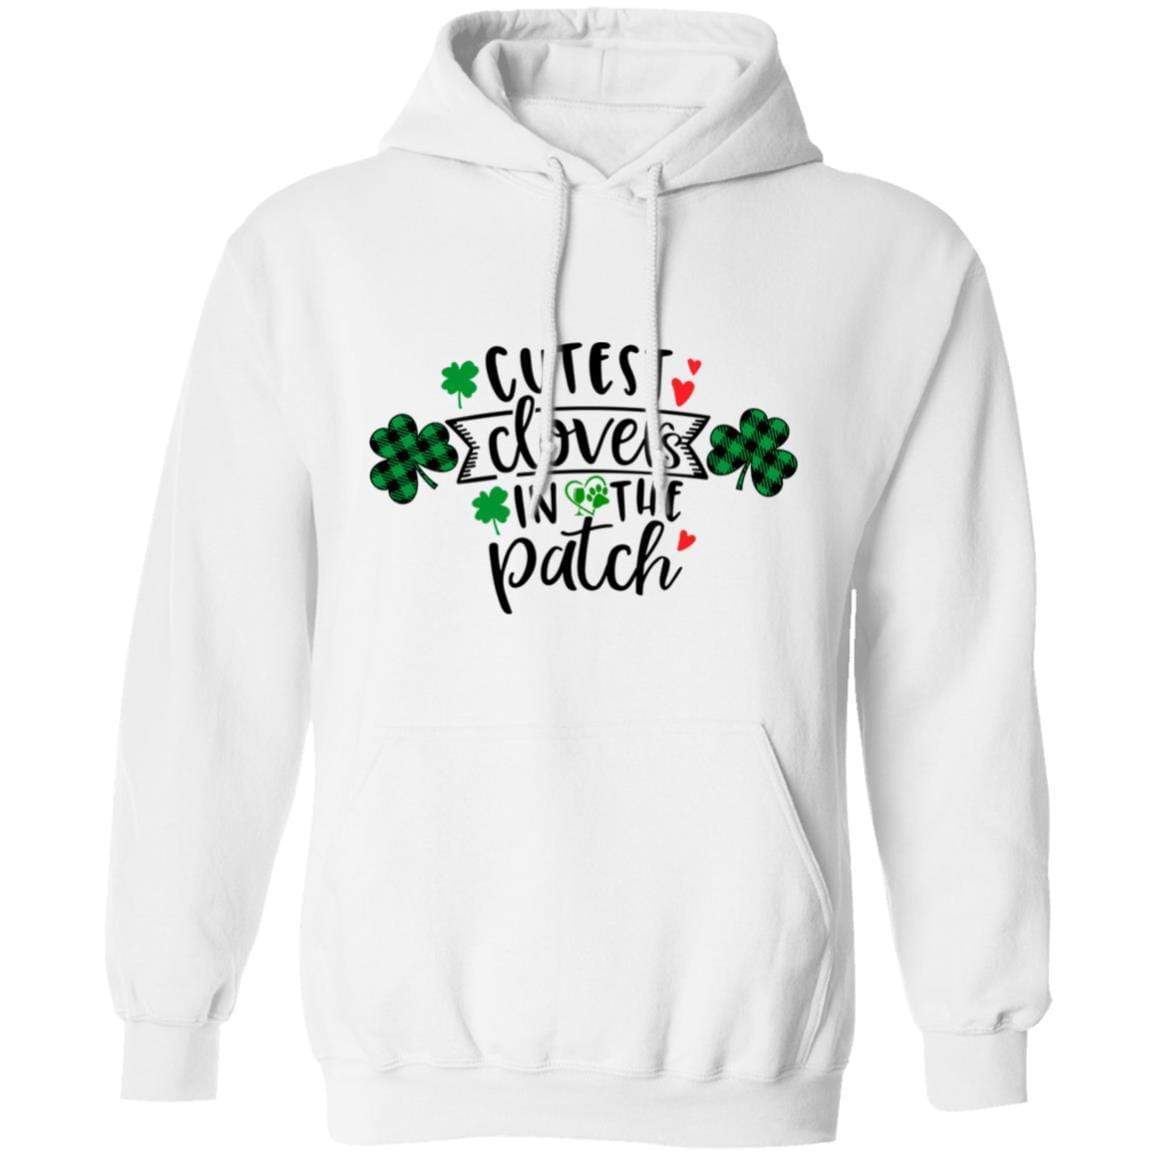 Sweatshirts White / S Winey Bitches Co "Cutest Clovers in the Patch" Pullover Hoodie 8 oz. WineyBitchesCo